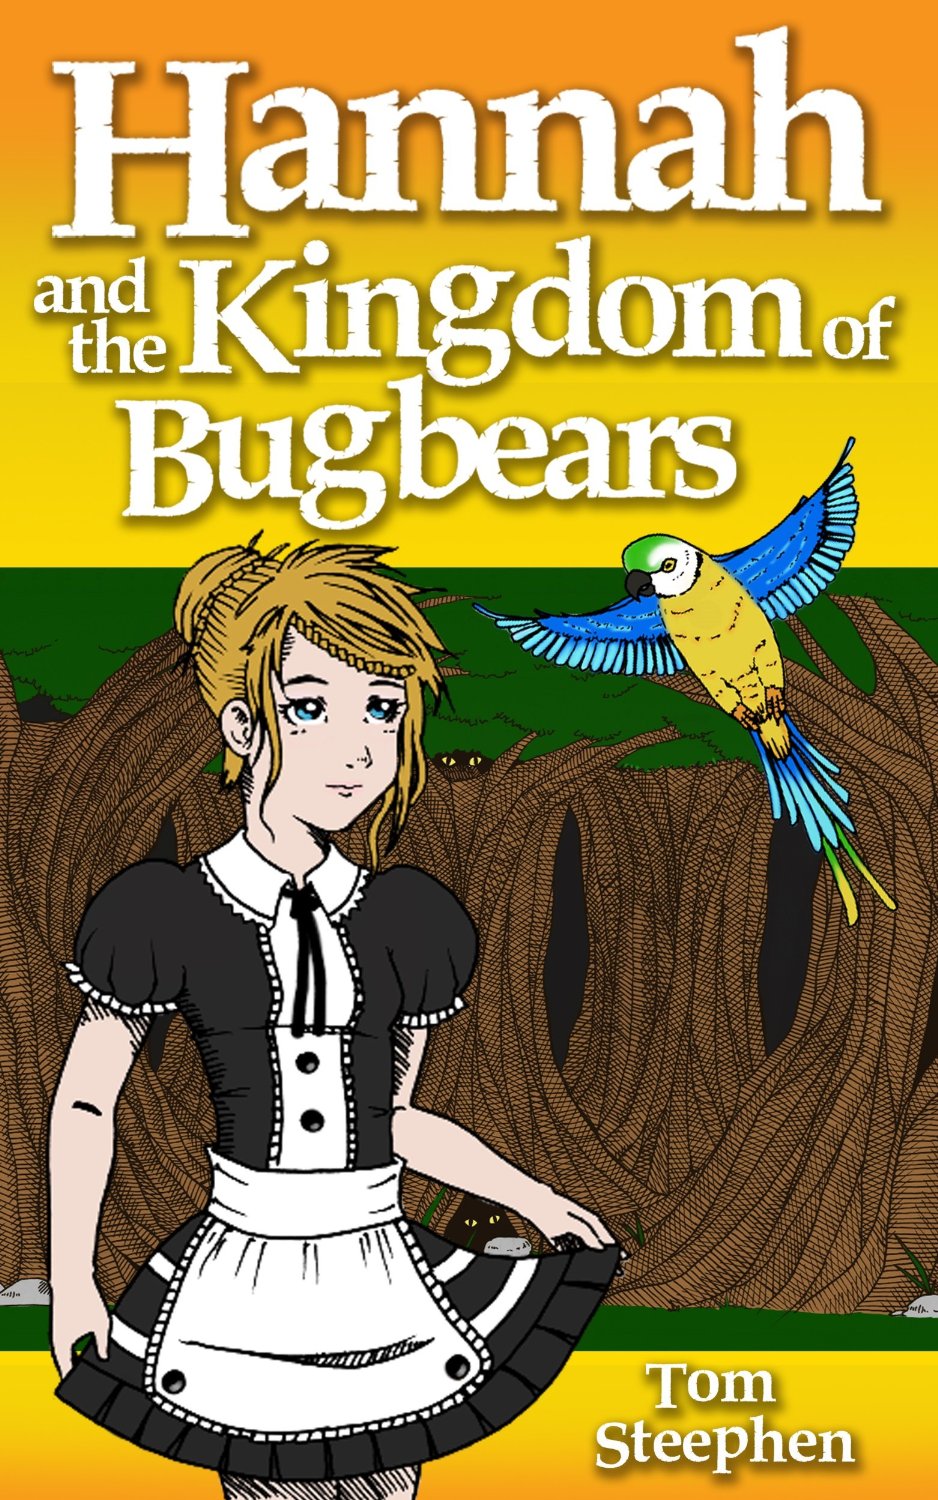 Hannah and the Kingdom of Bugbears by Tom Steephen